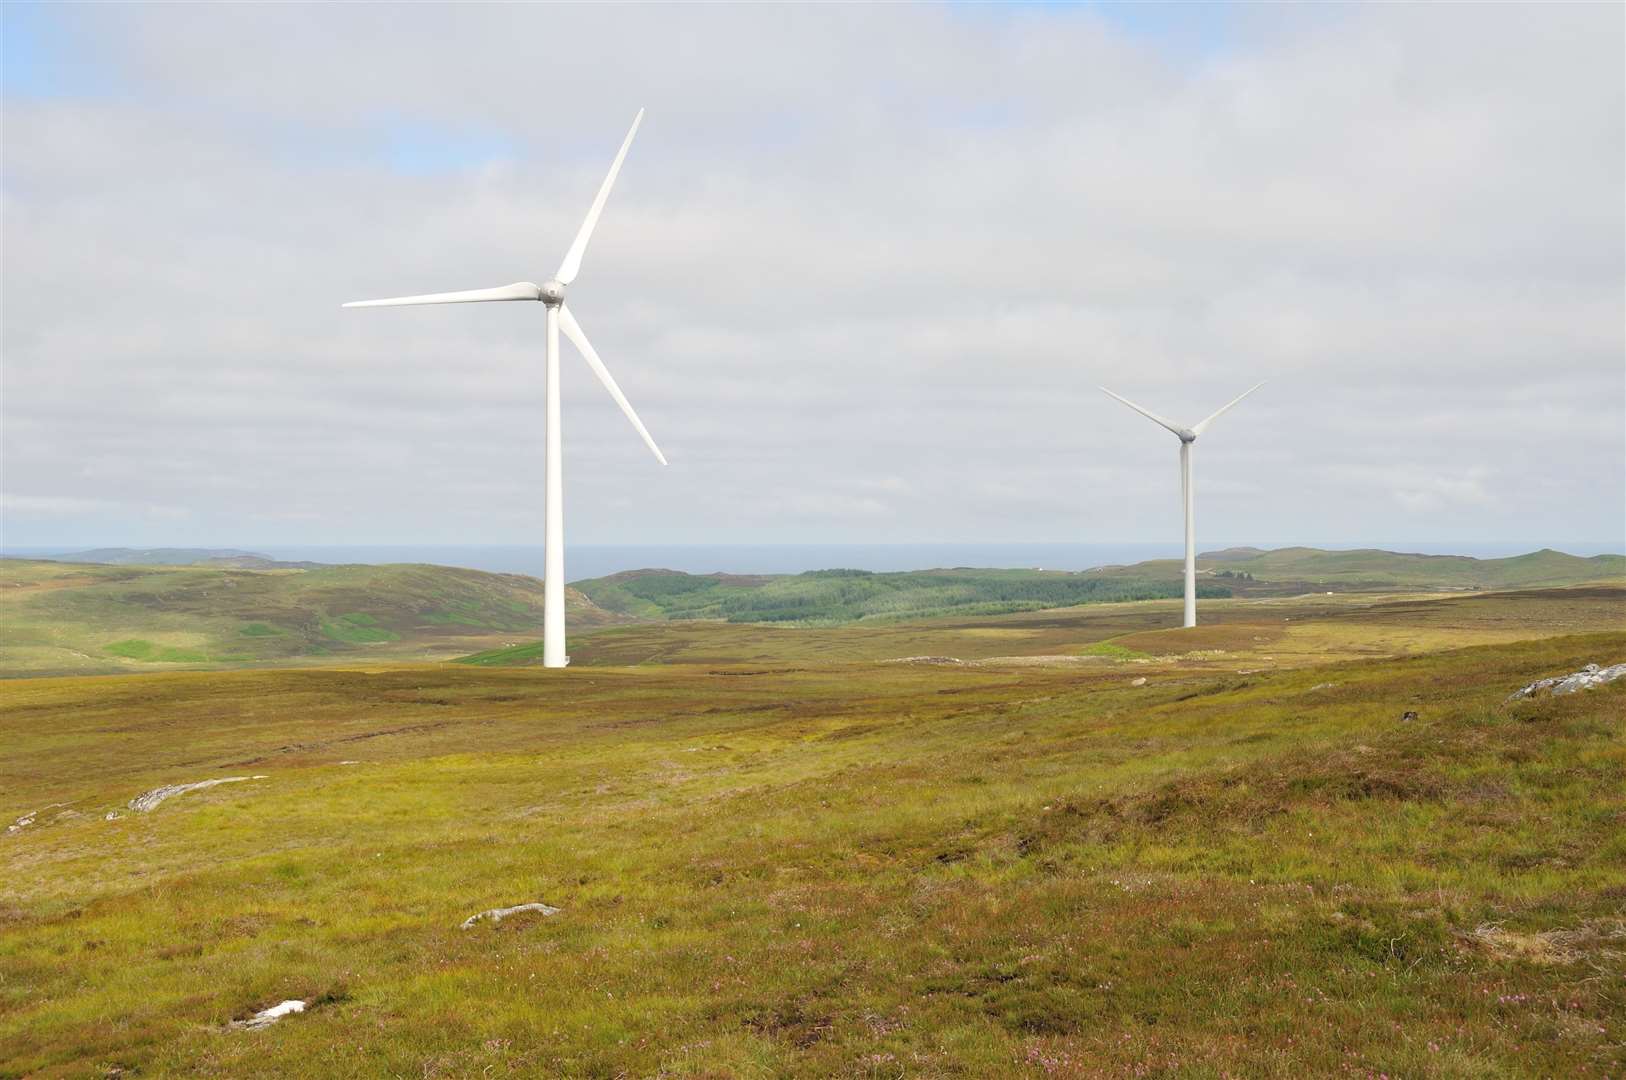 Onshore wind is competing in an allocation round for the first time since 2015.